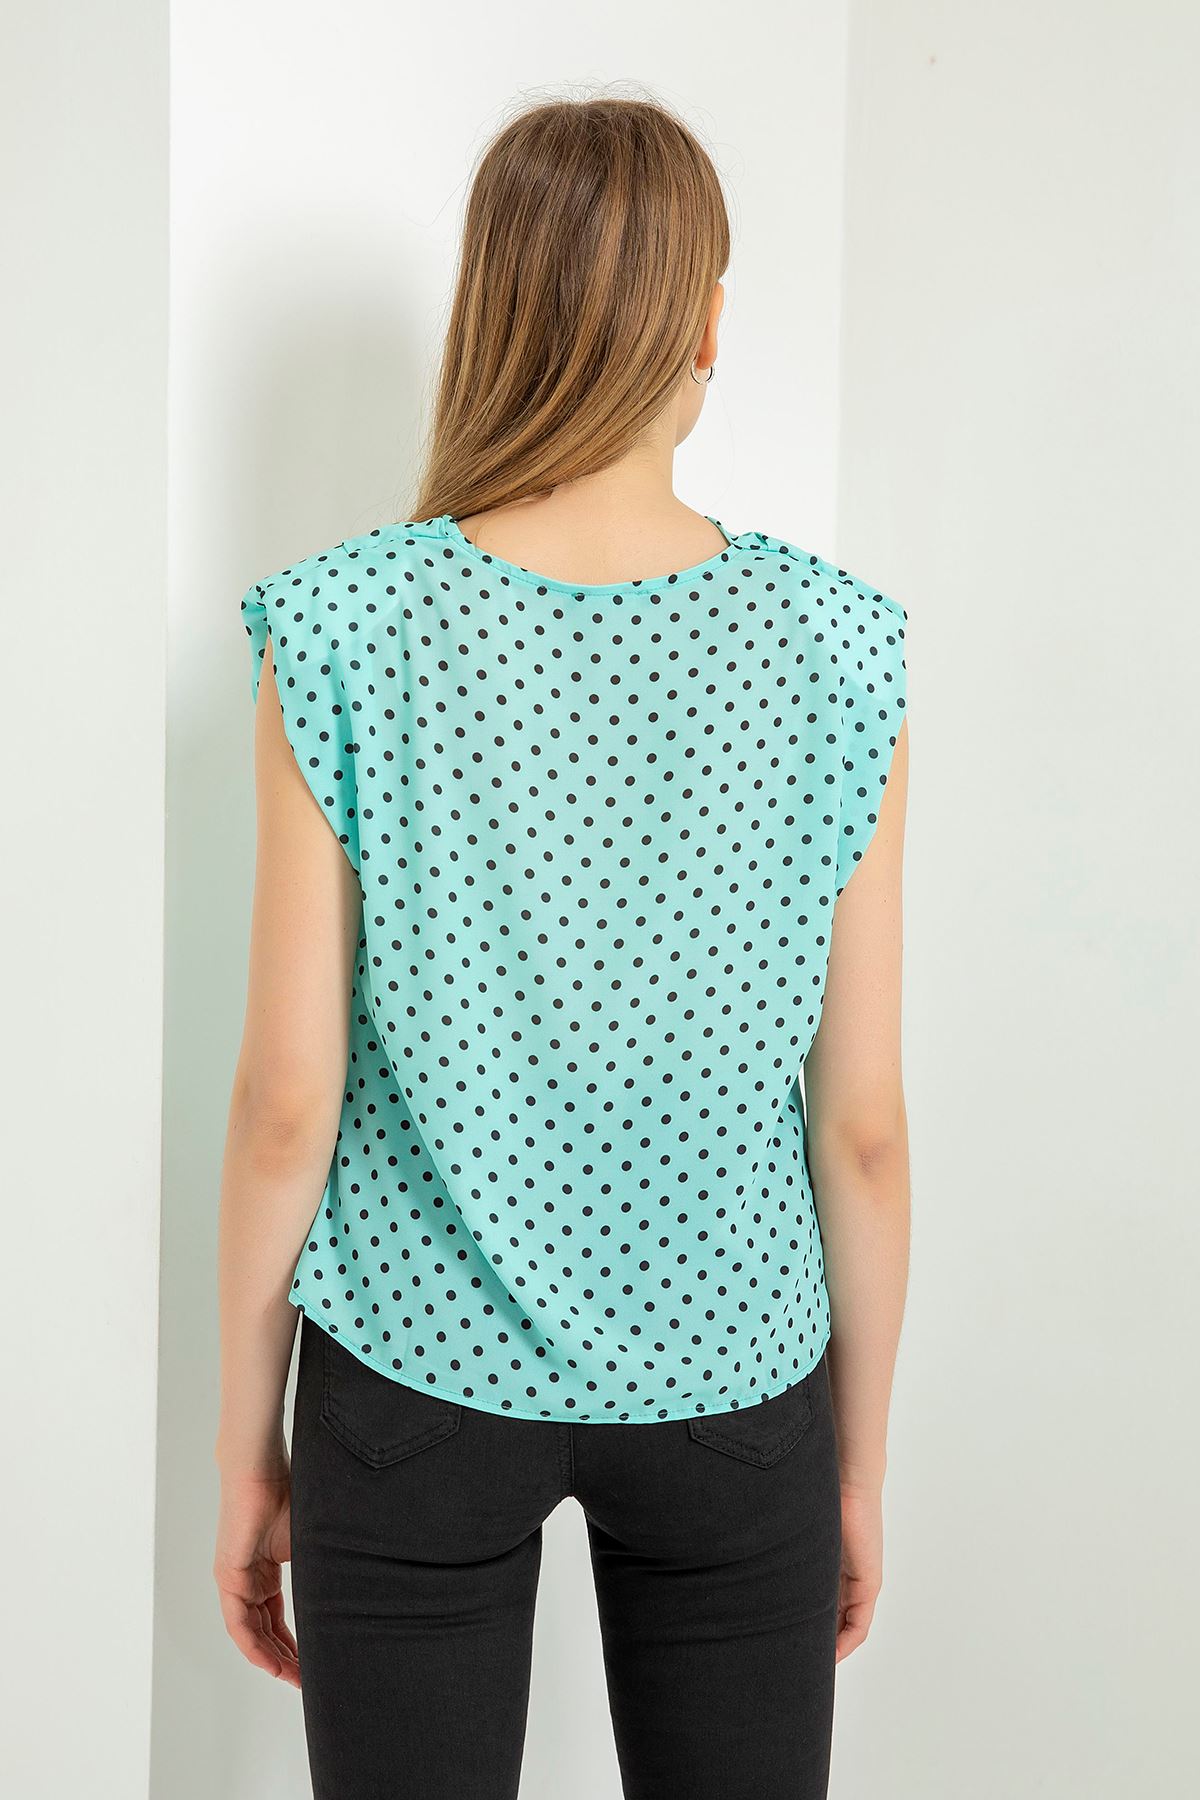 Jessica Blouse Sleeveless With Shoulder Pads Dotted Print Blouse - Mint